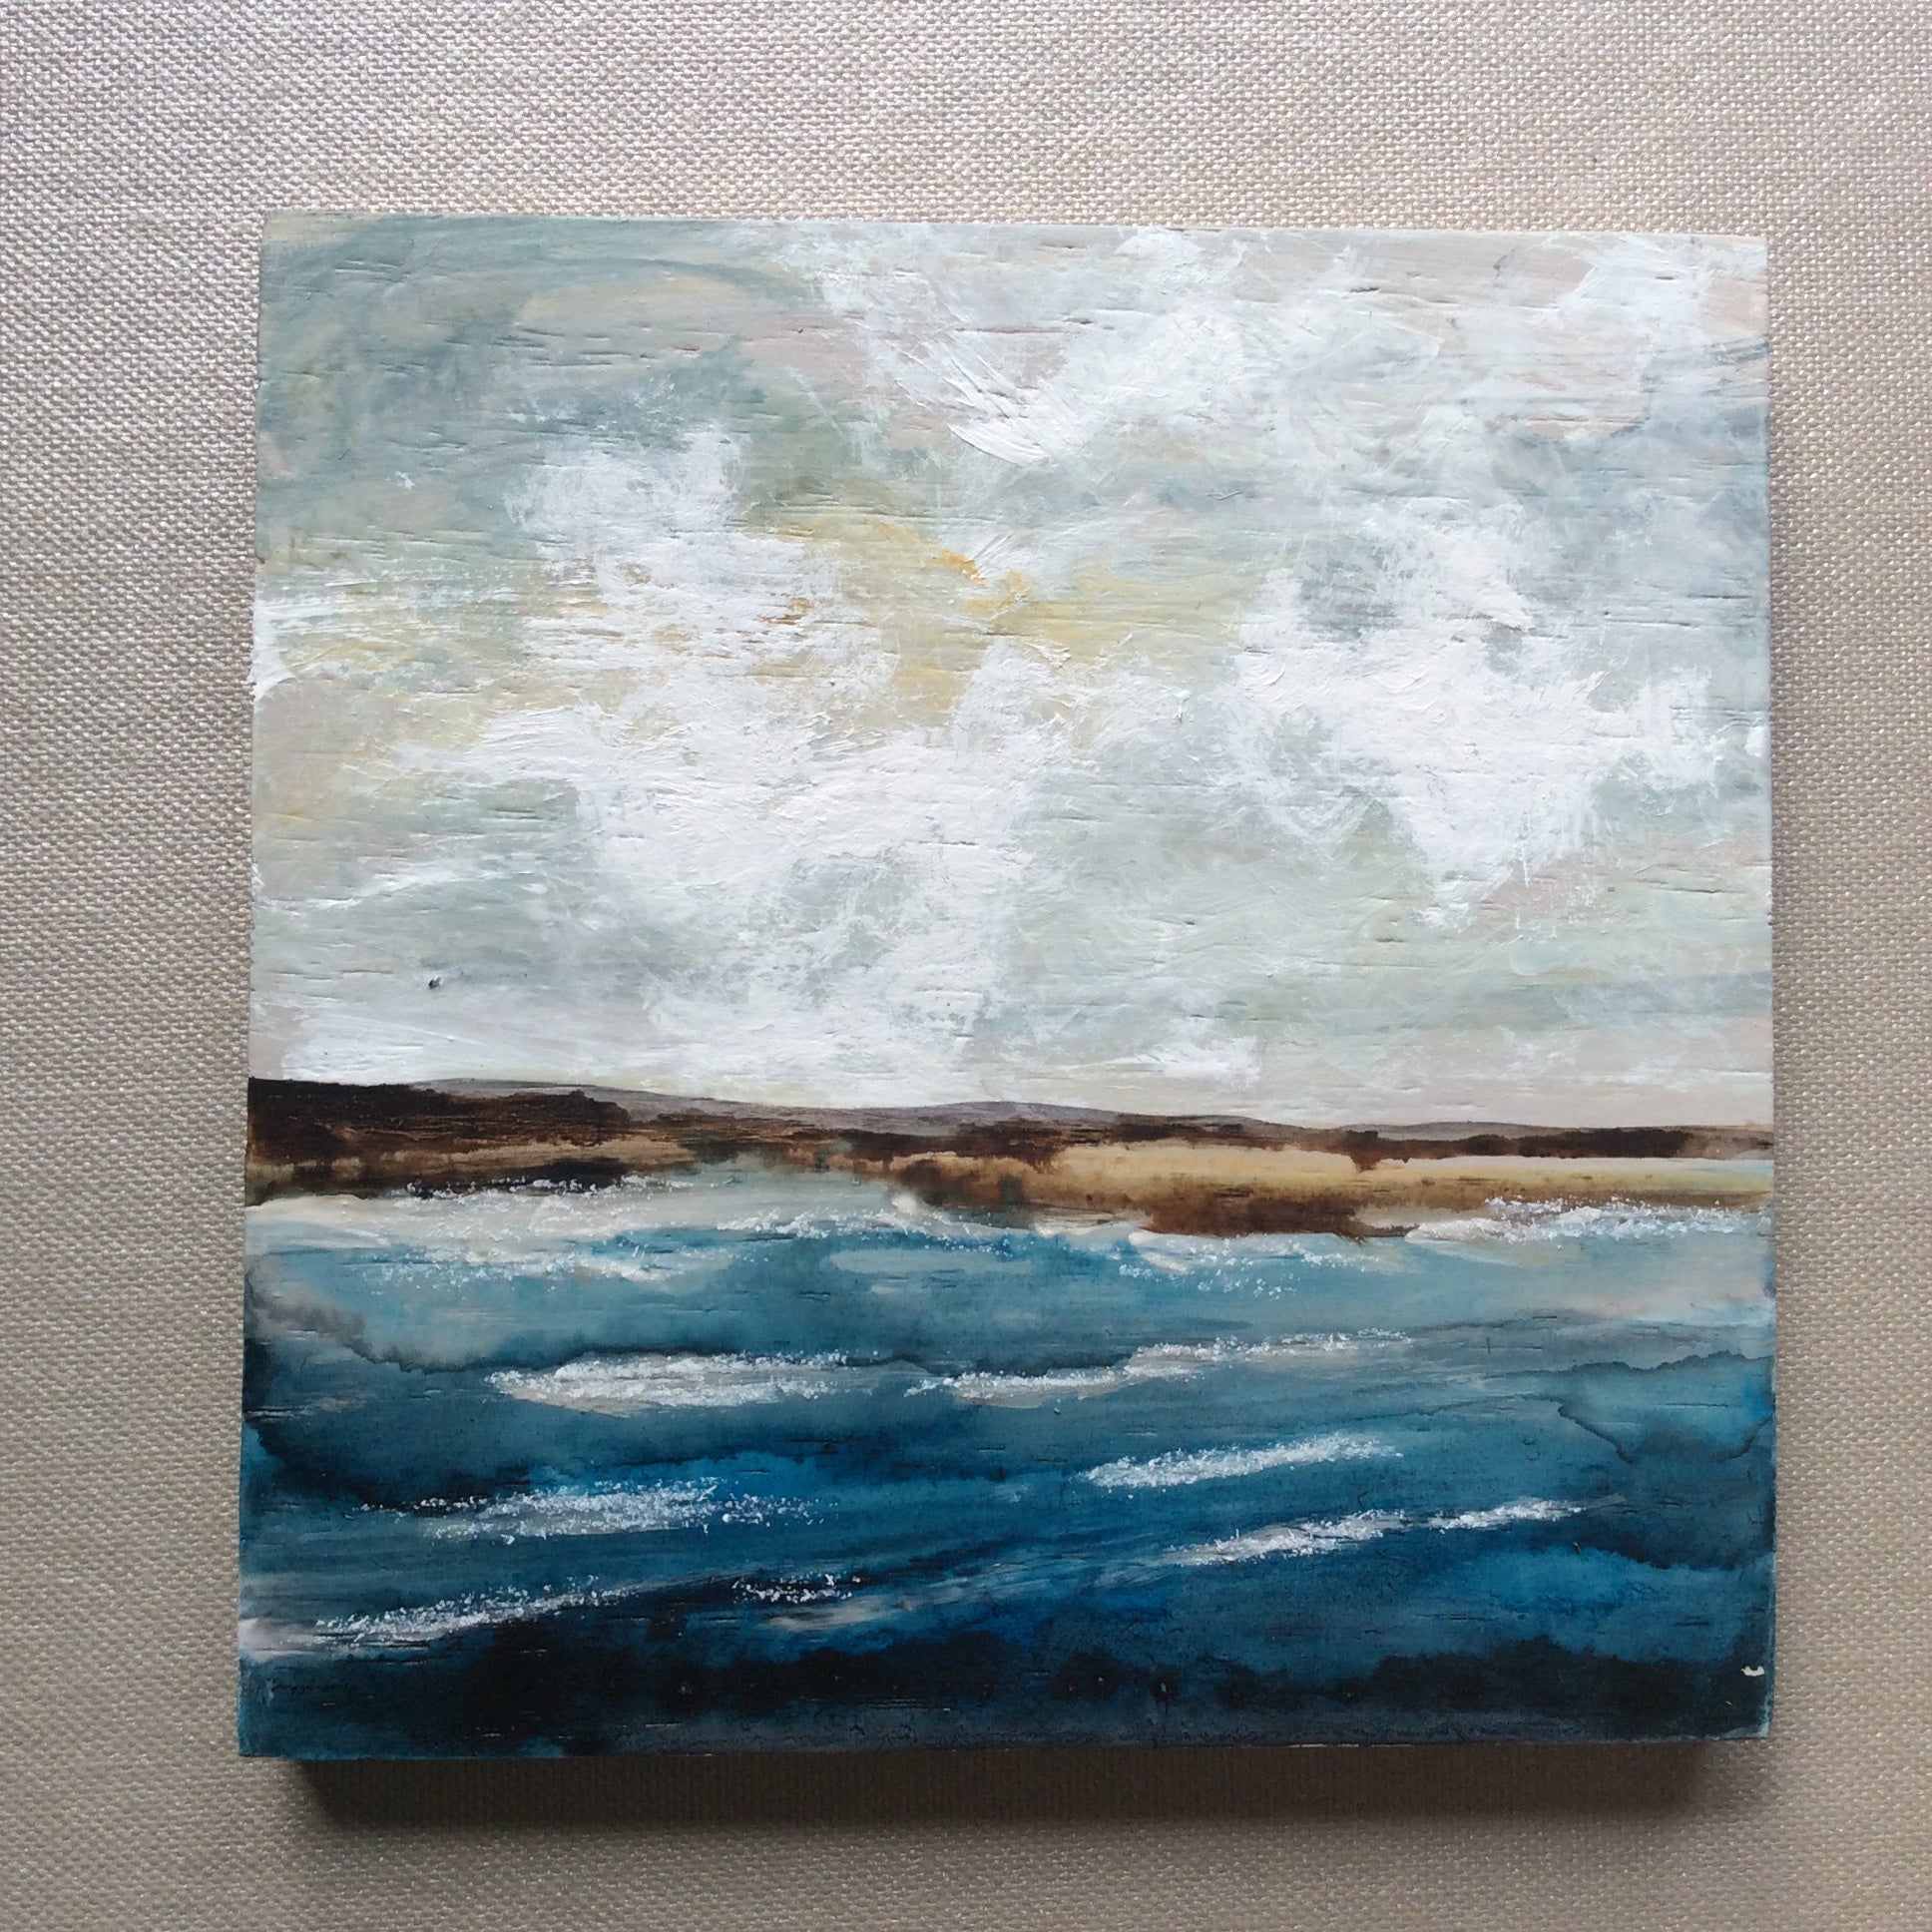 Mixed media art on wood By Louise O’Hara “Gentle Waves”